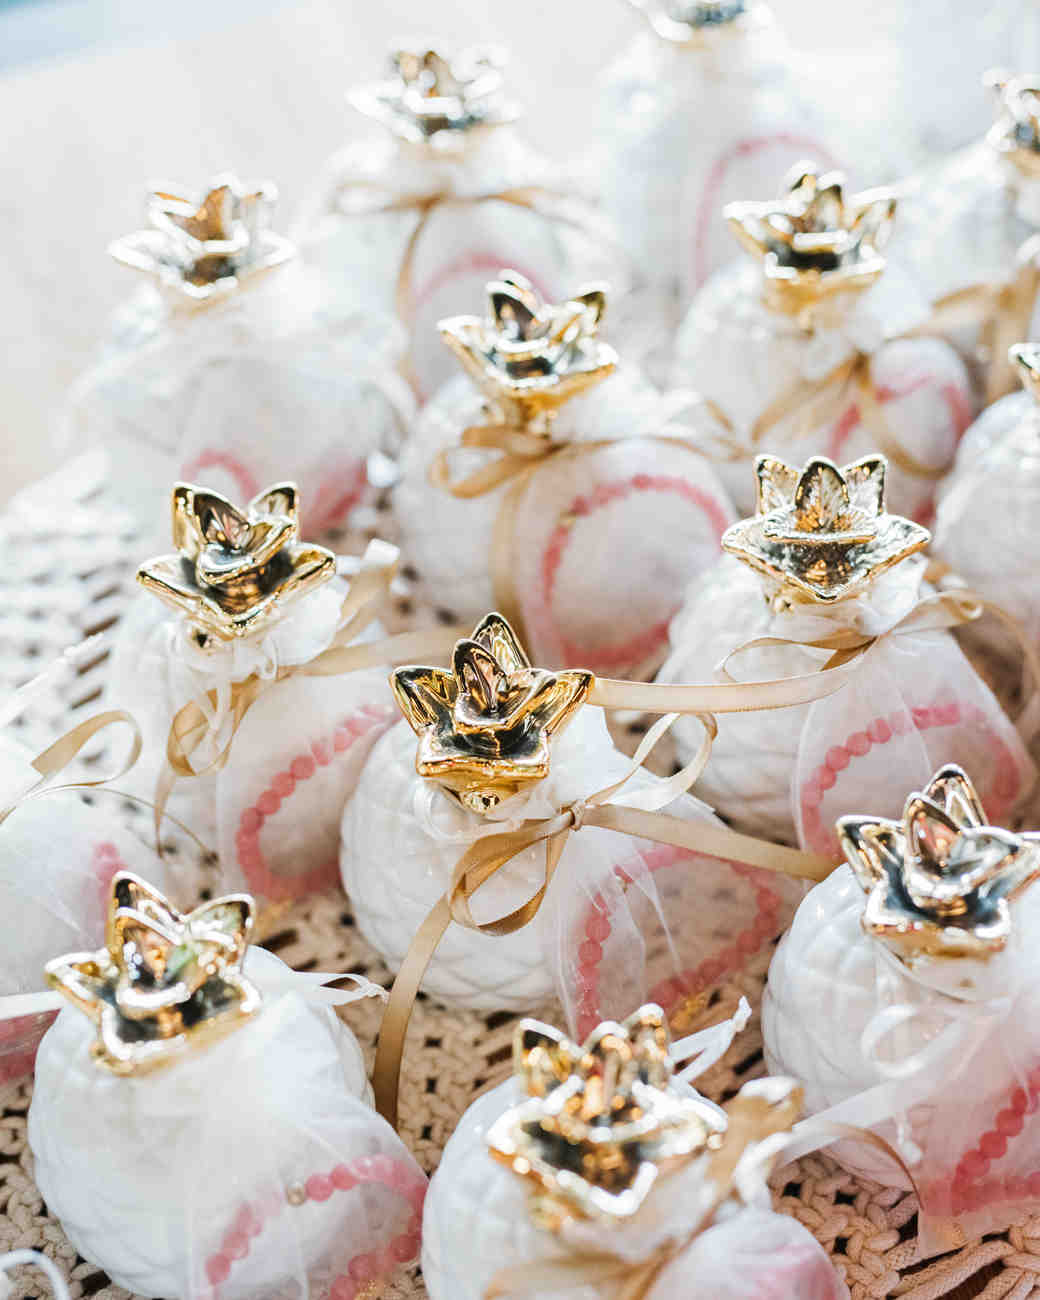 Bridal Shower Favors Your Guests Will Love | Martha Stewart Weddings